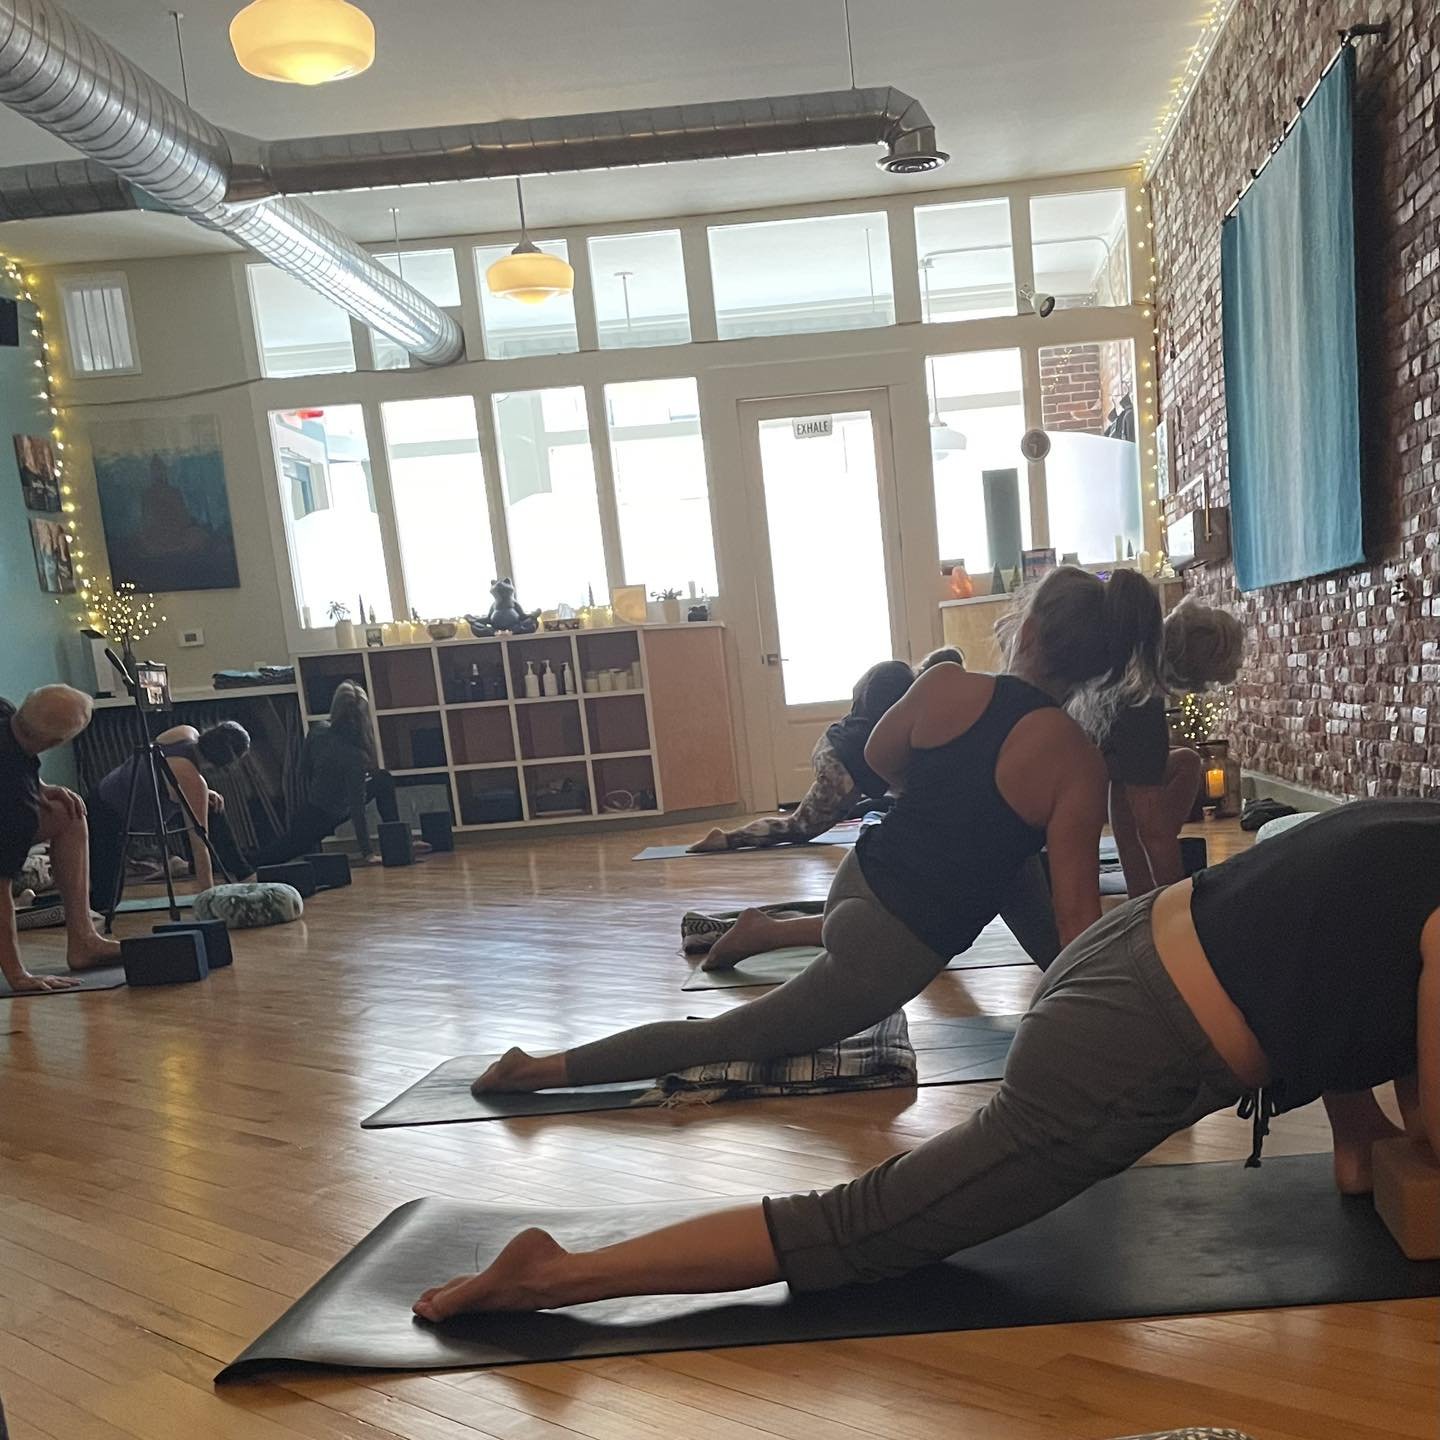 &ldquo;Yoga begins right where I am - not where I was yesterday or where I long to be.&rdquo; - Linda Sparrowe

#yogapractice #yogastudio #beherenow #breathewithus #community